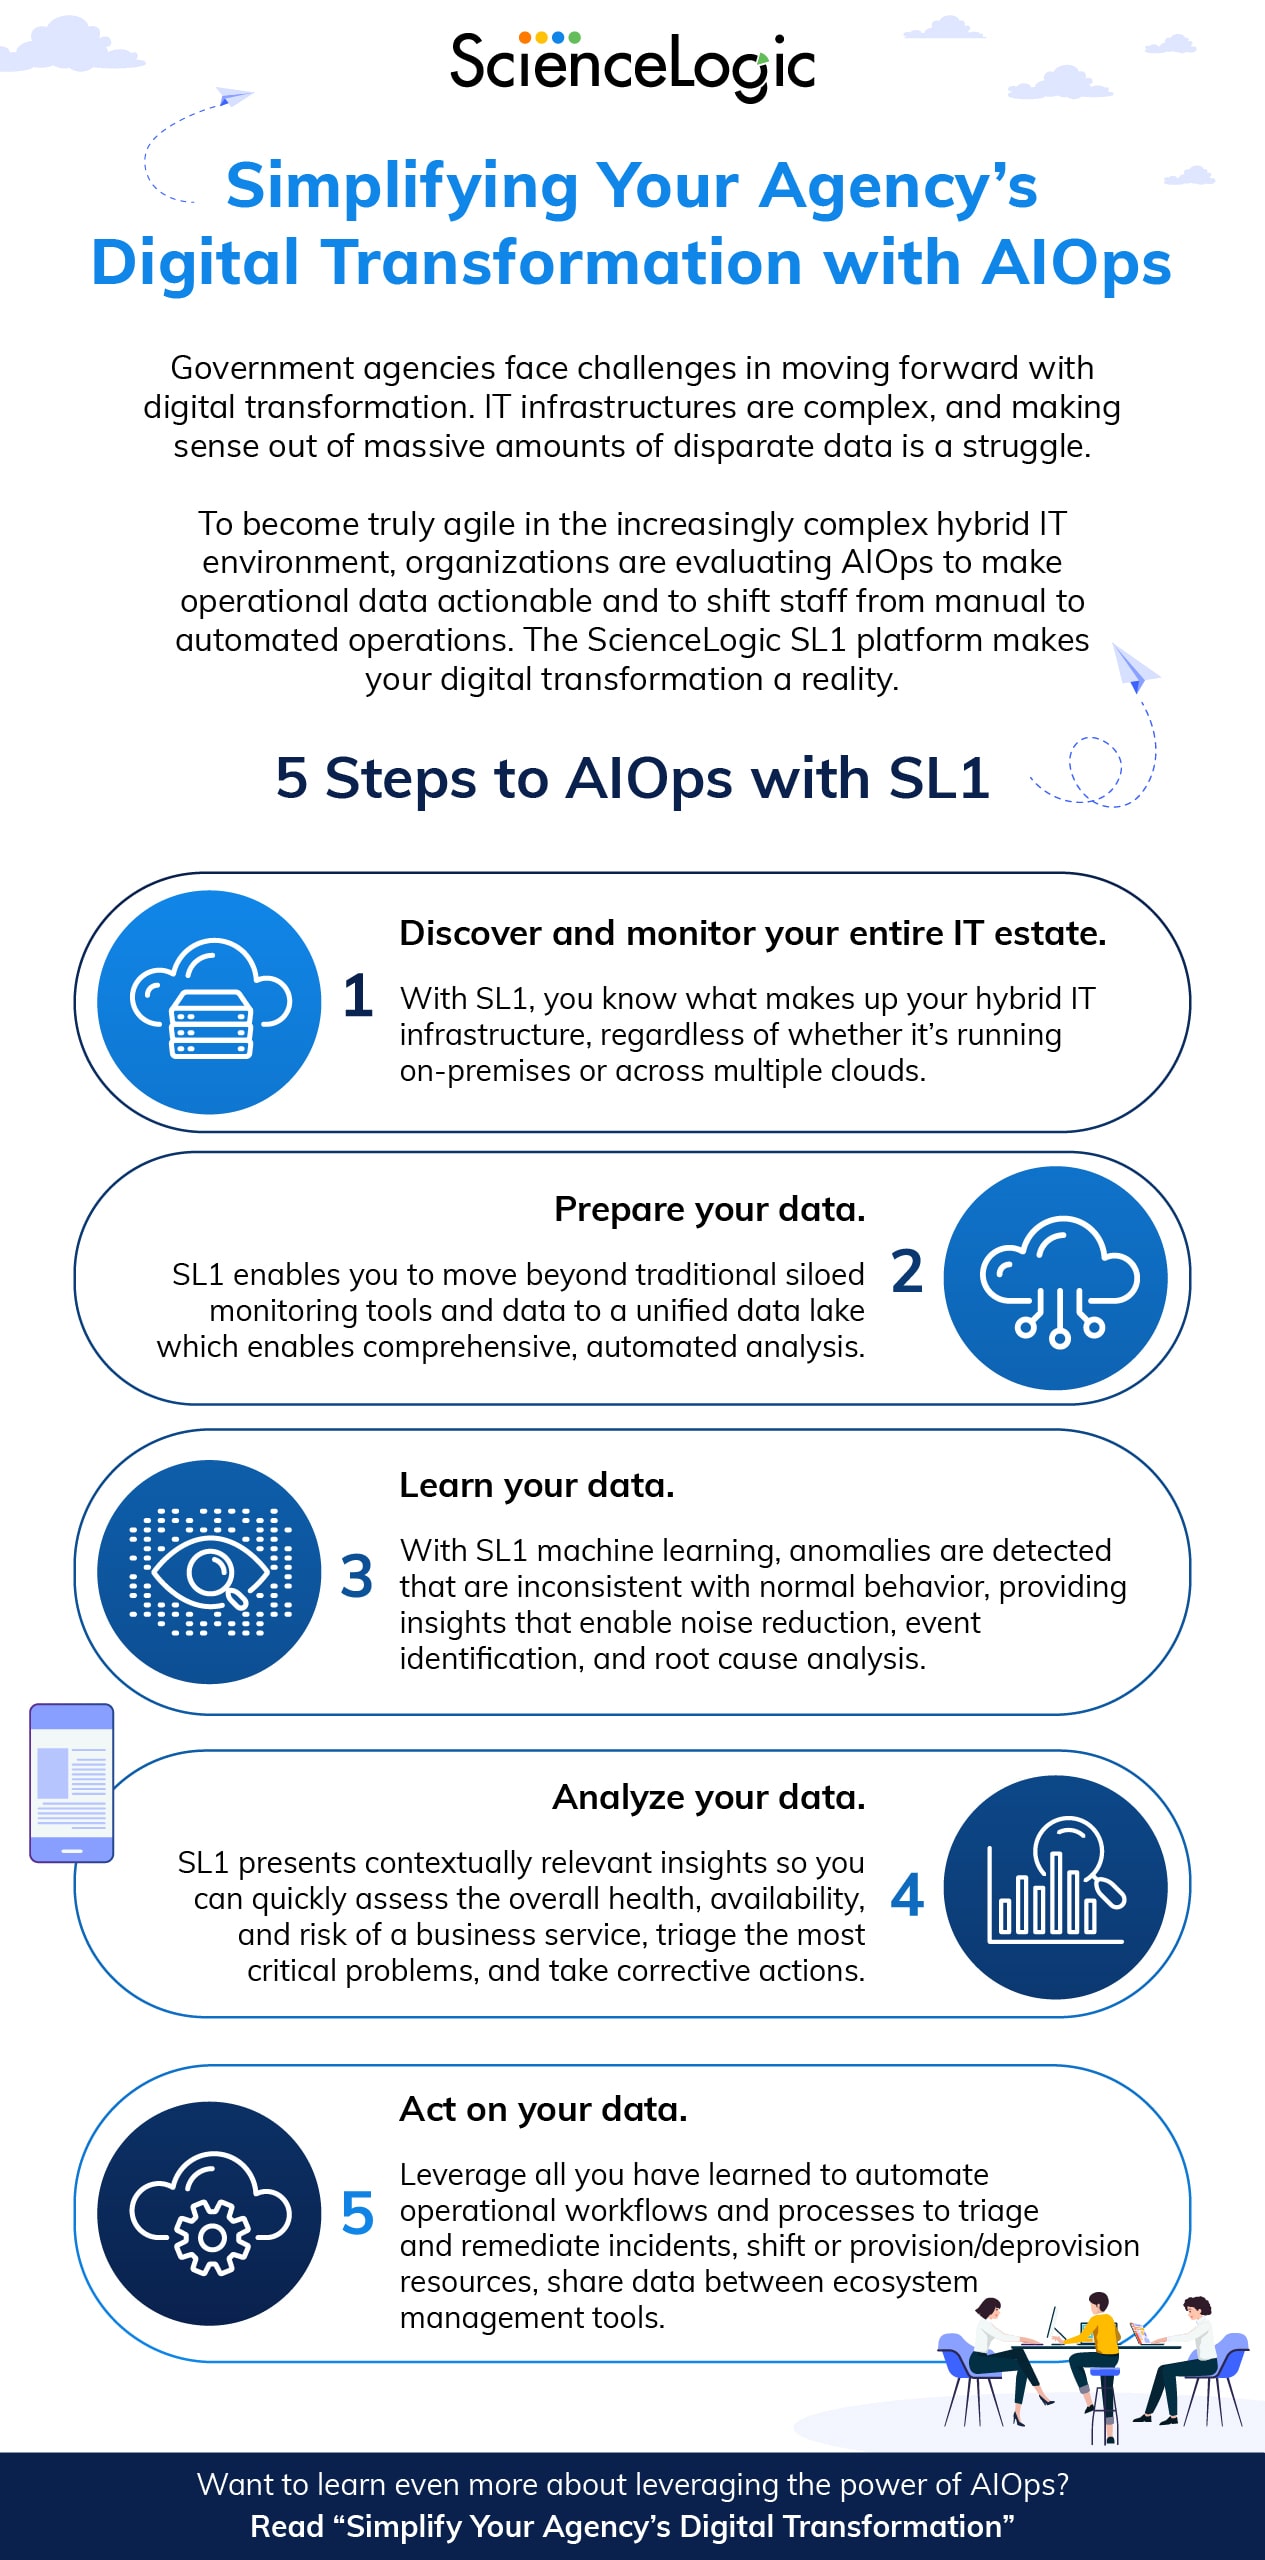 Simplifying Your Agency's Digital Transformation with AIOps - ScienceLogic